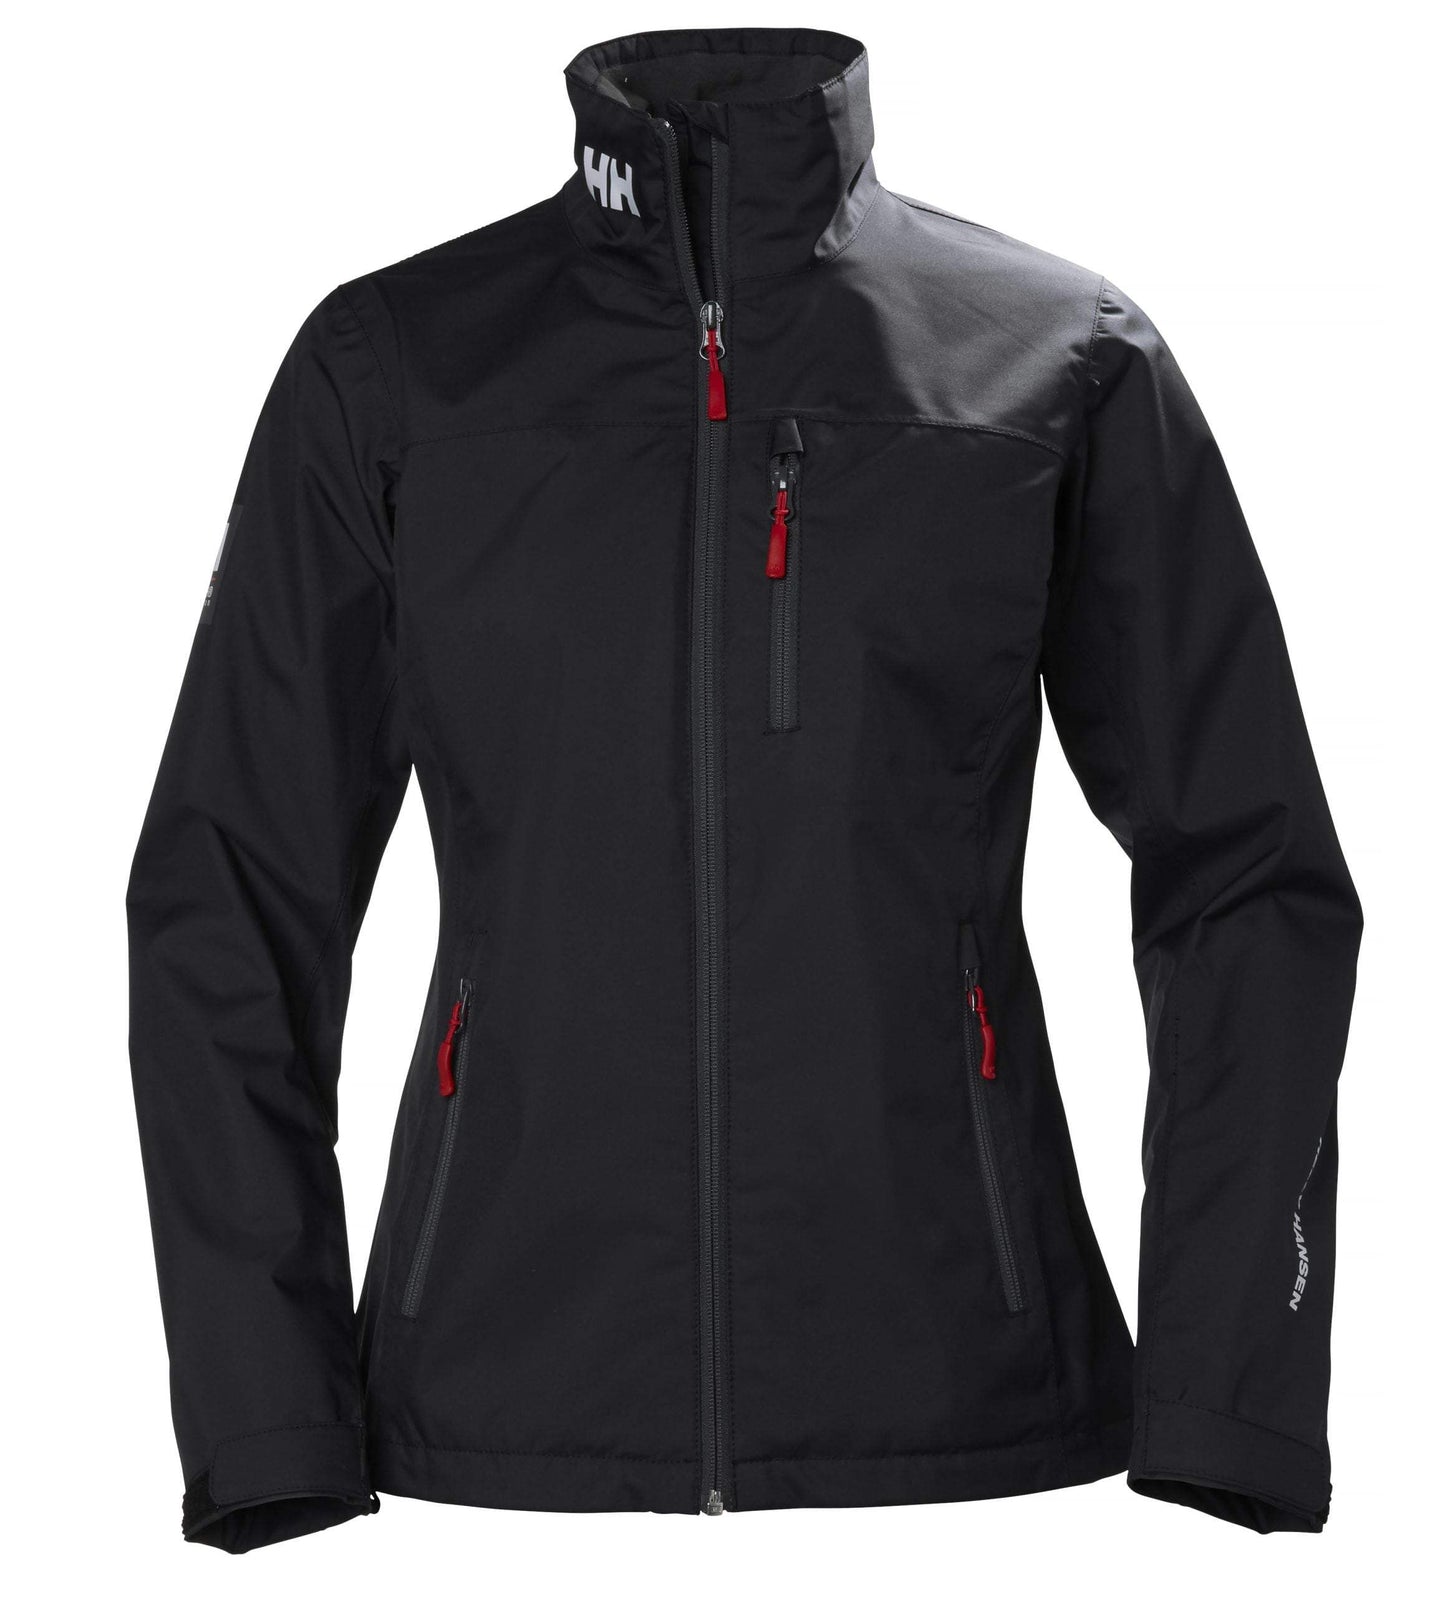 Women’s Crew Jacket by Helly Hansen - The Luxury Promotional Gifts Company Limited